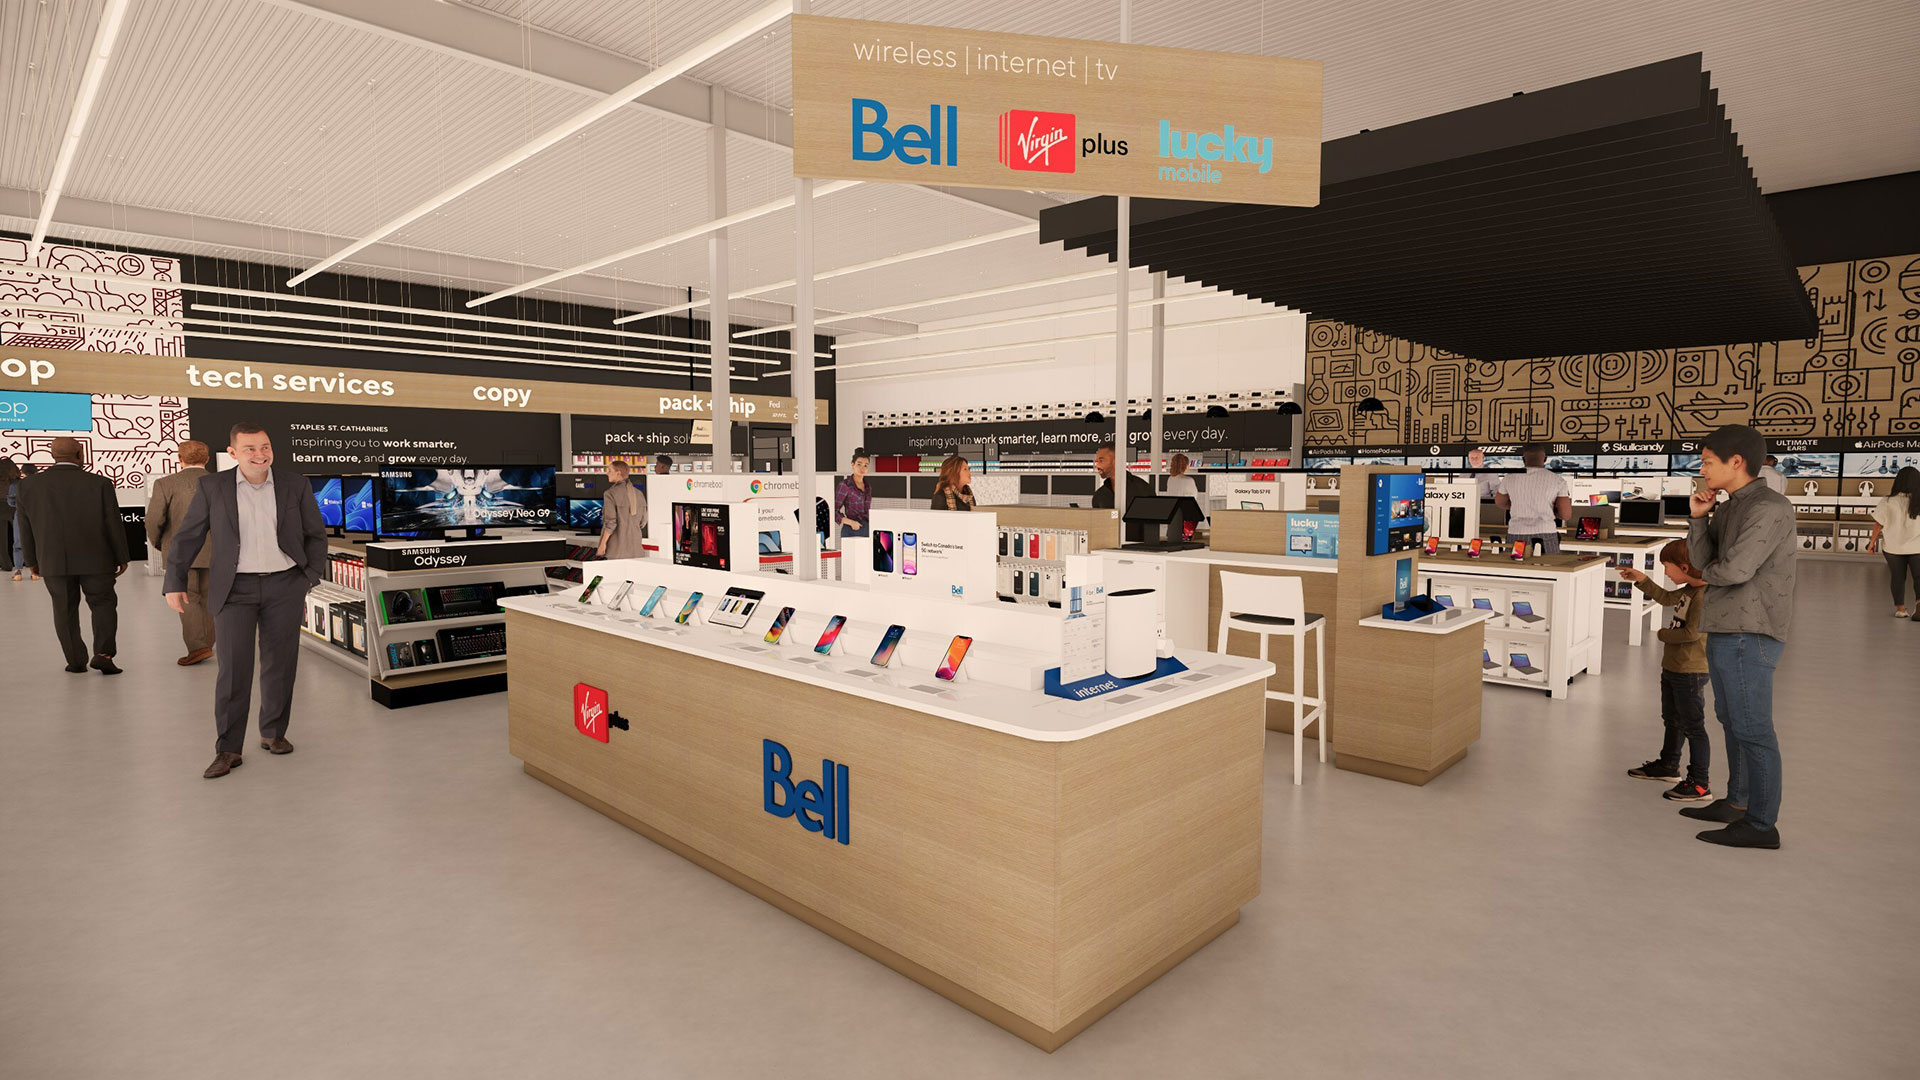 Bell Booth in Staples